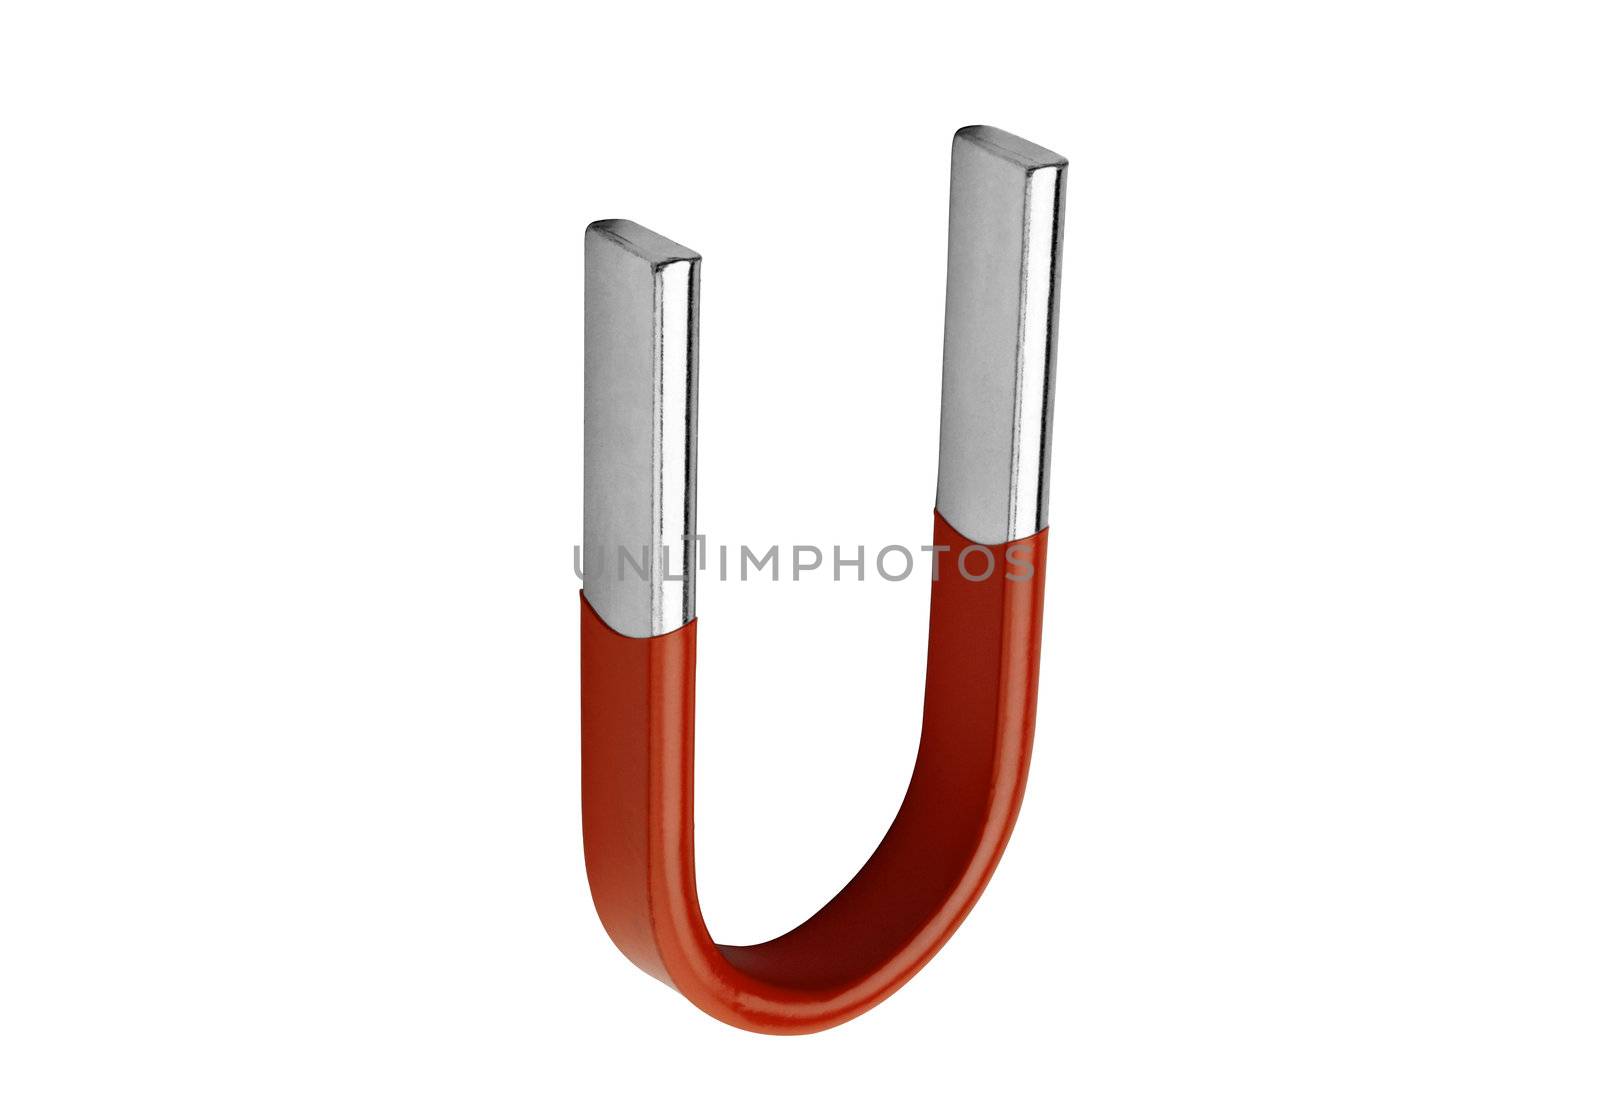 A horseshoe magnet over a white background by shutswis